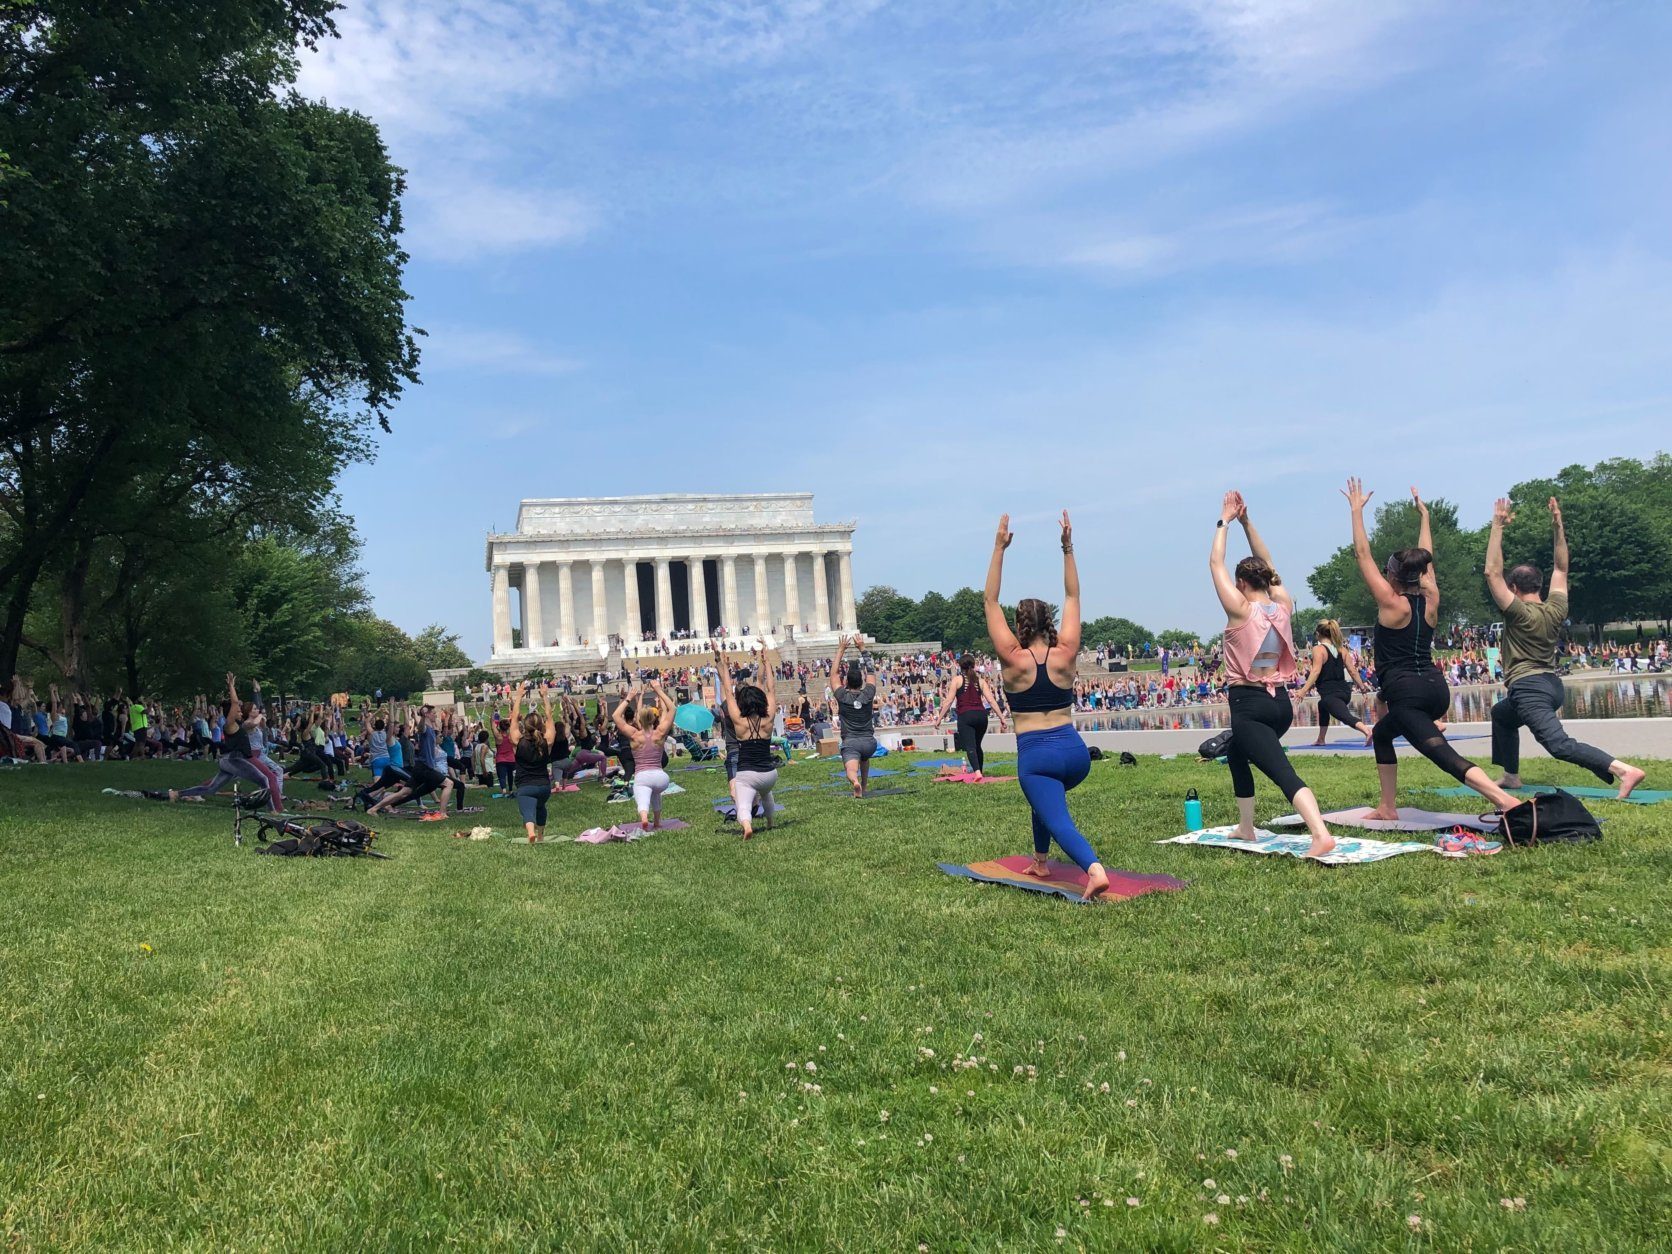  Temperatures were hovering in the upper 80s, near 90 on Sunday, but that didn't stop these yogis from holding a session on the National Mall. (WTOP/Keara Dowd)